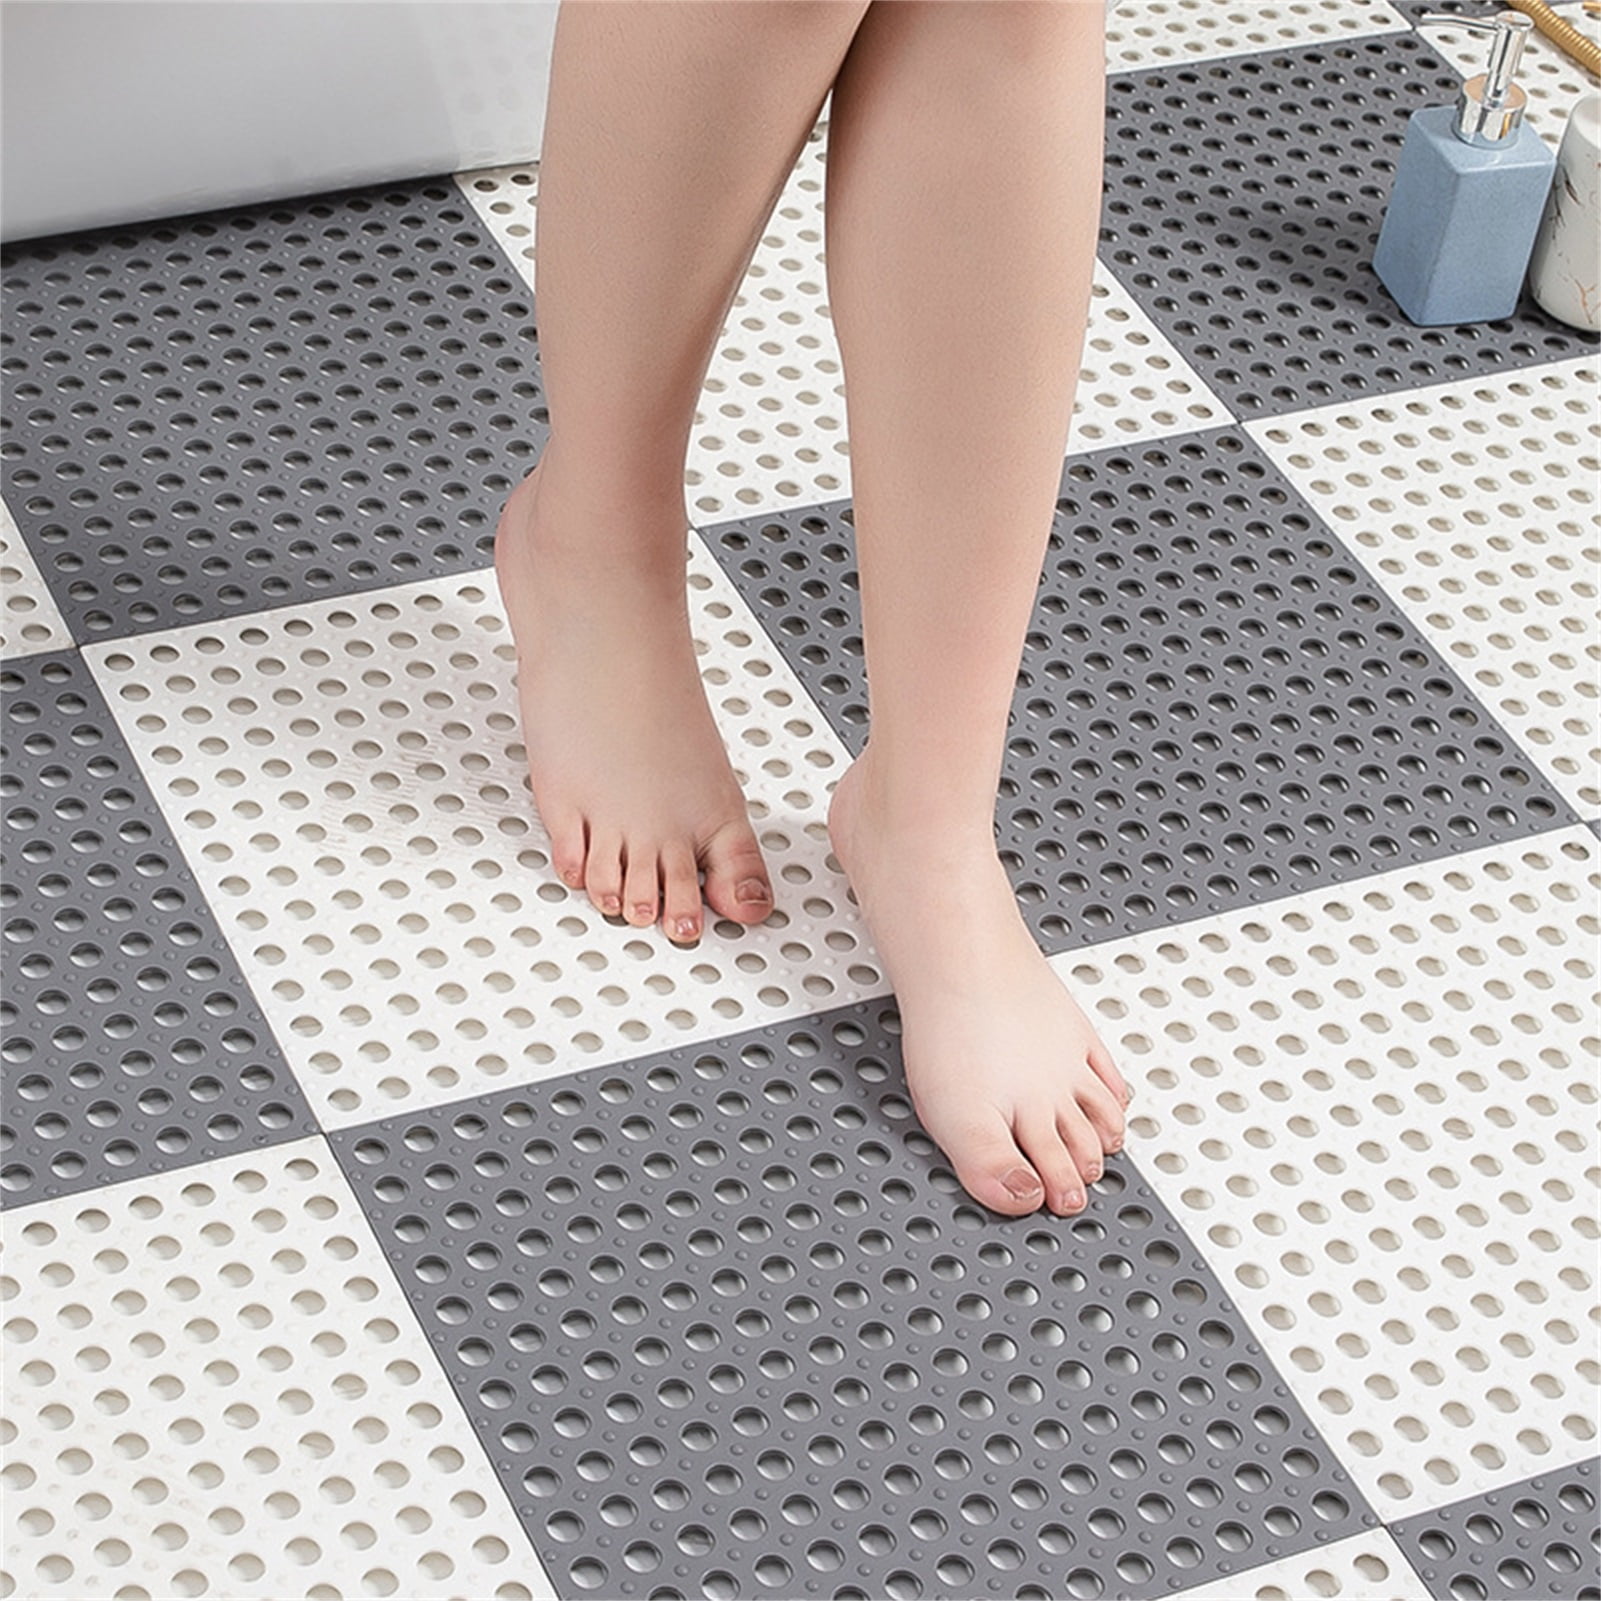 Vive Shower Mat - 22 by 22 Square Non Slip Large Bath Mat for Bathtub -  Patented Design - Suction Cup Traction Skid Pad for Stalls Floors Tub 